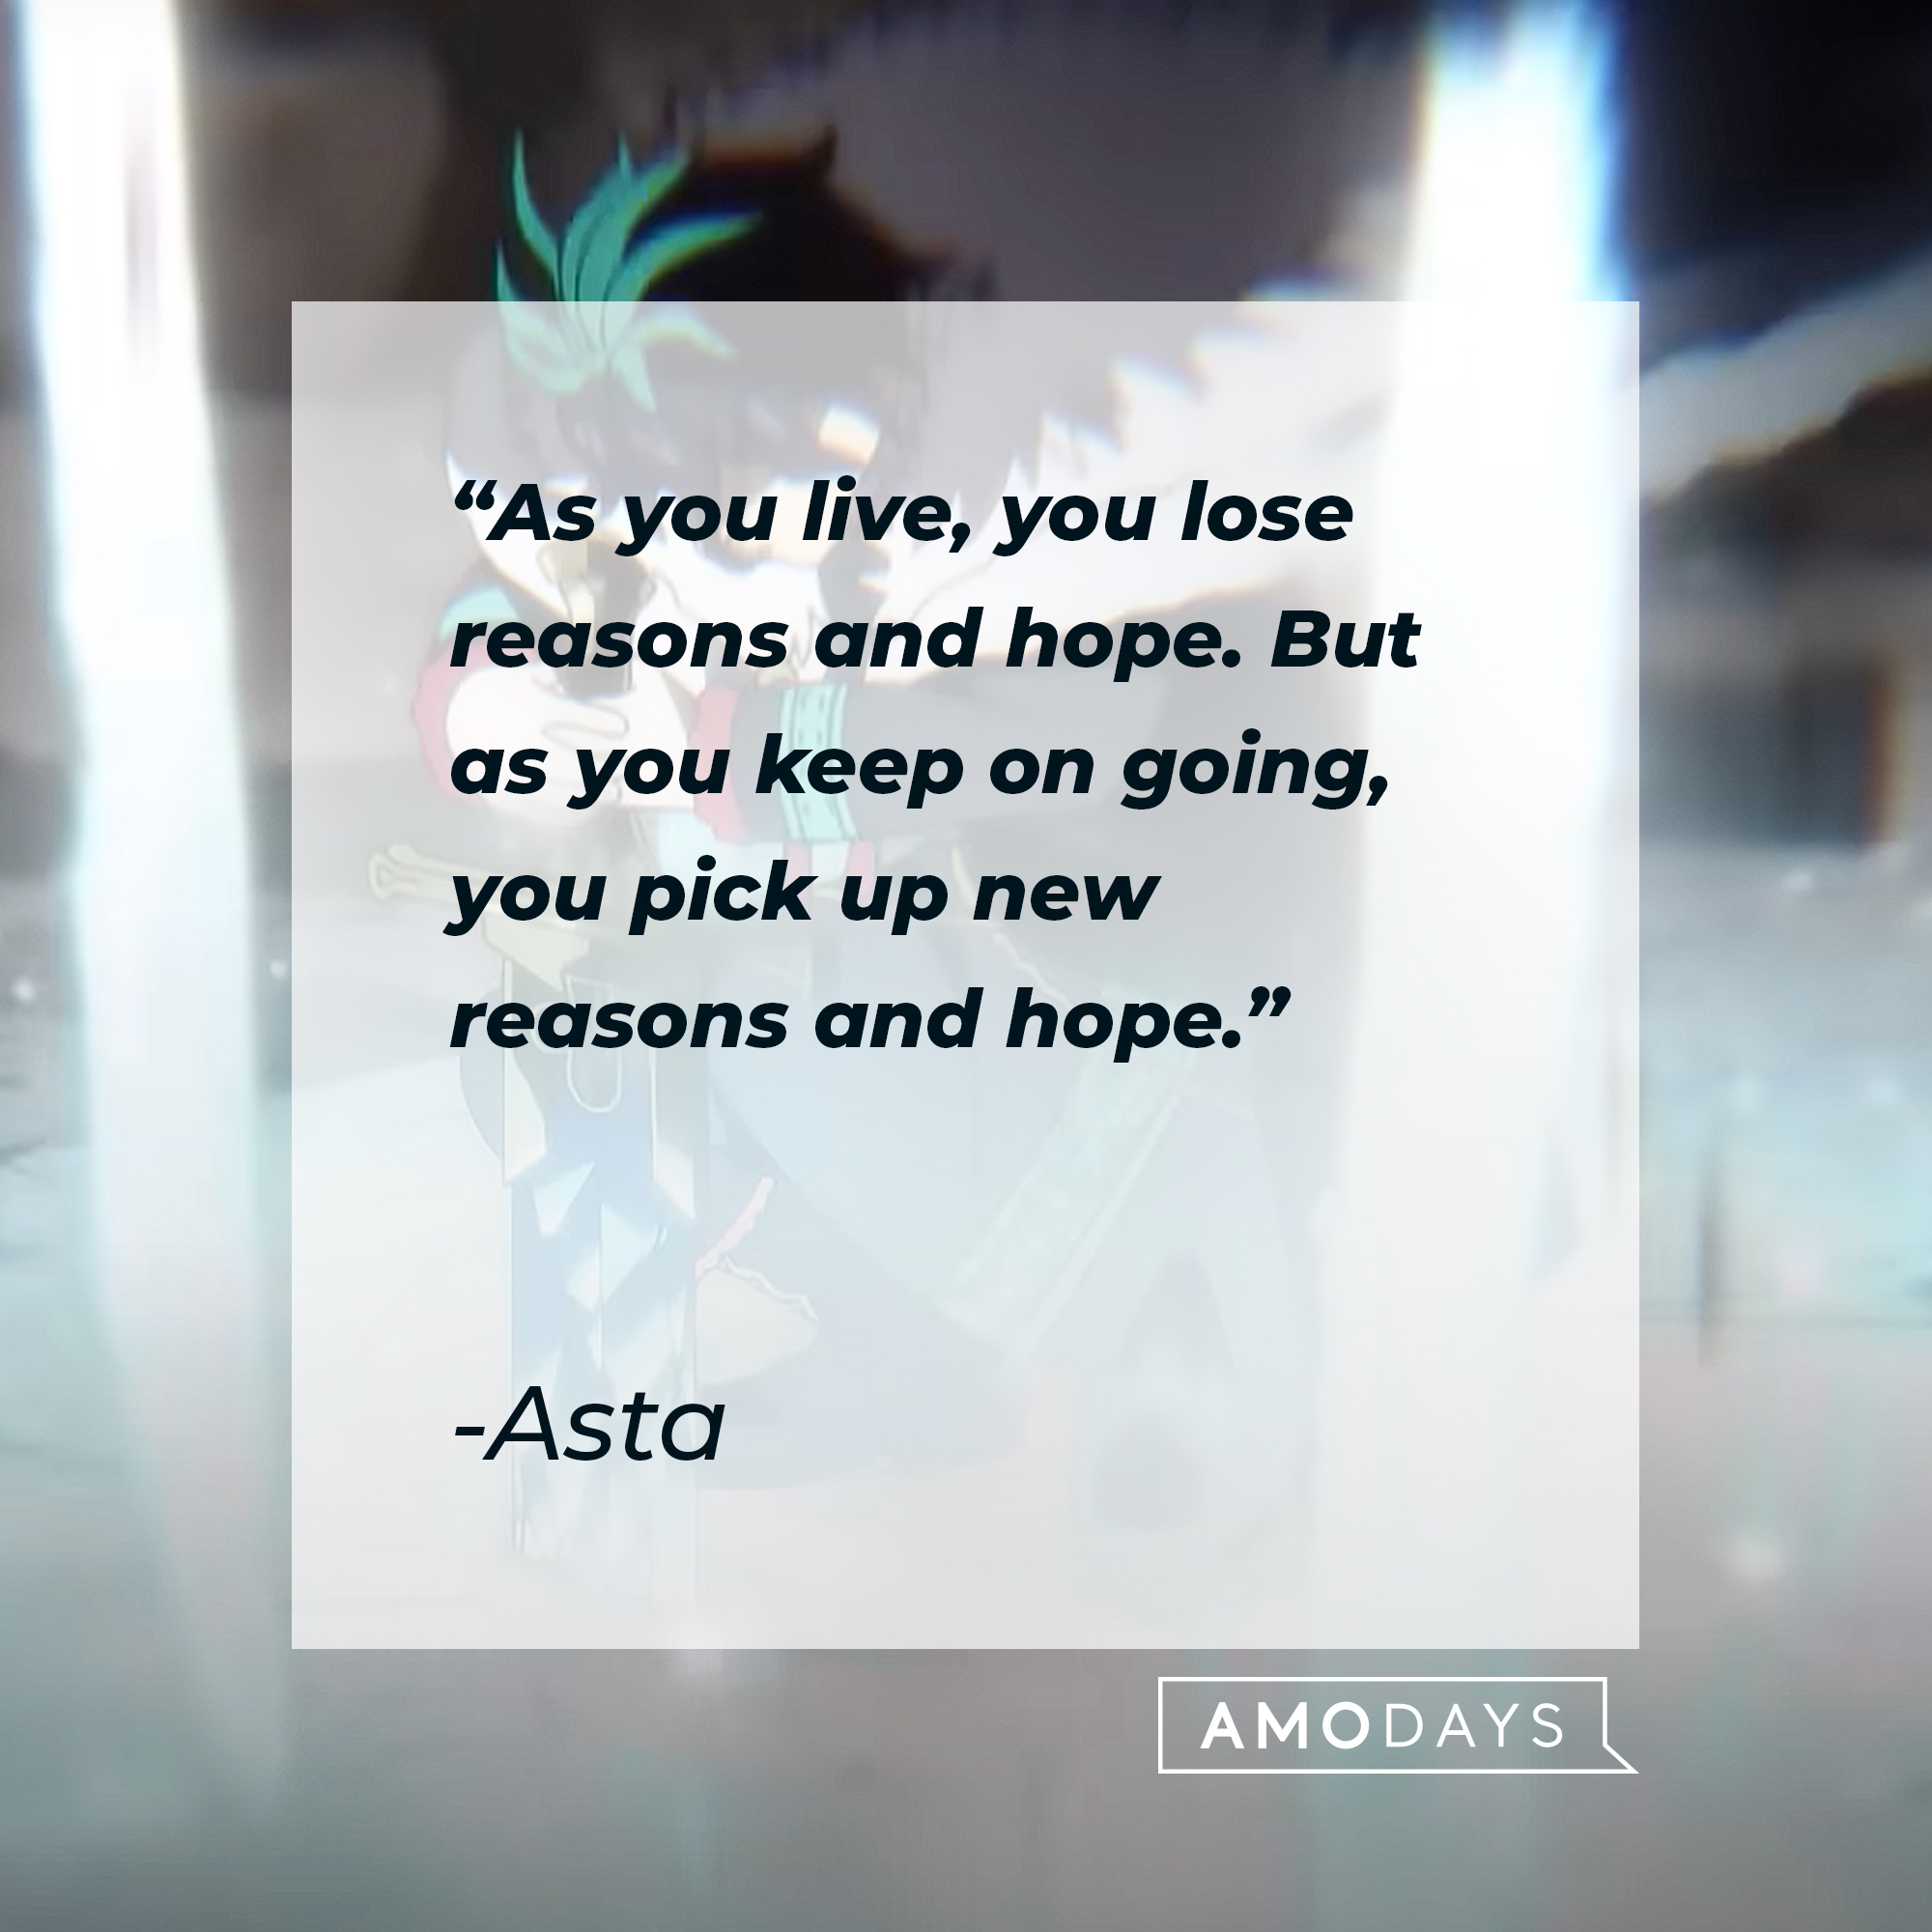 An image of Asta with his quote: “As you live, you lose reasons and hope. But as you keep on going, you pick up new reasons and hope.” | Source: youtube/netflixanime